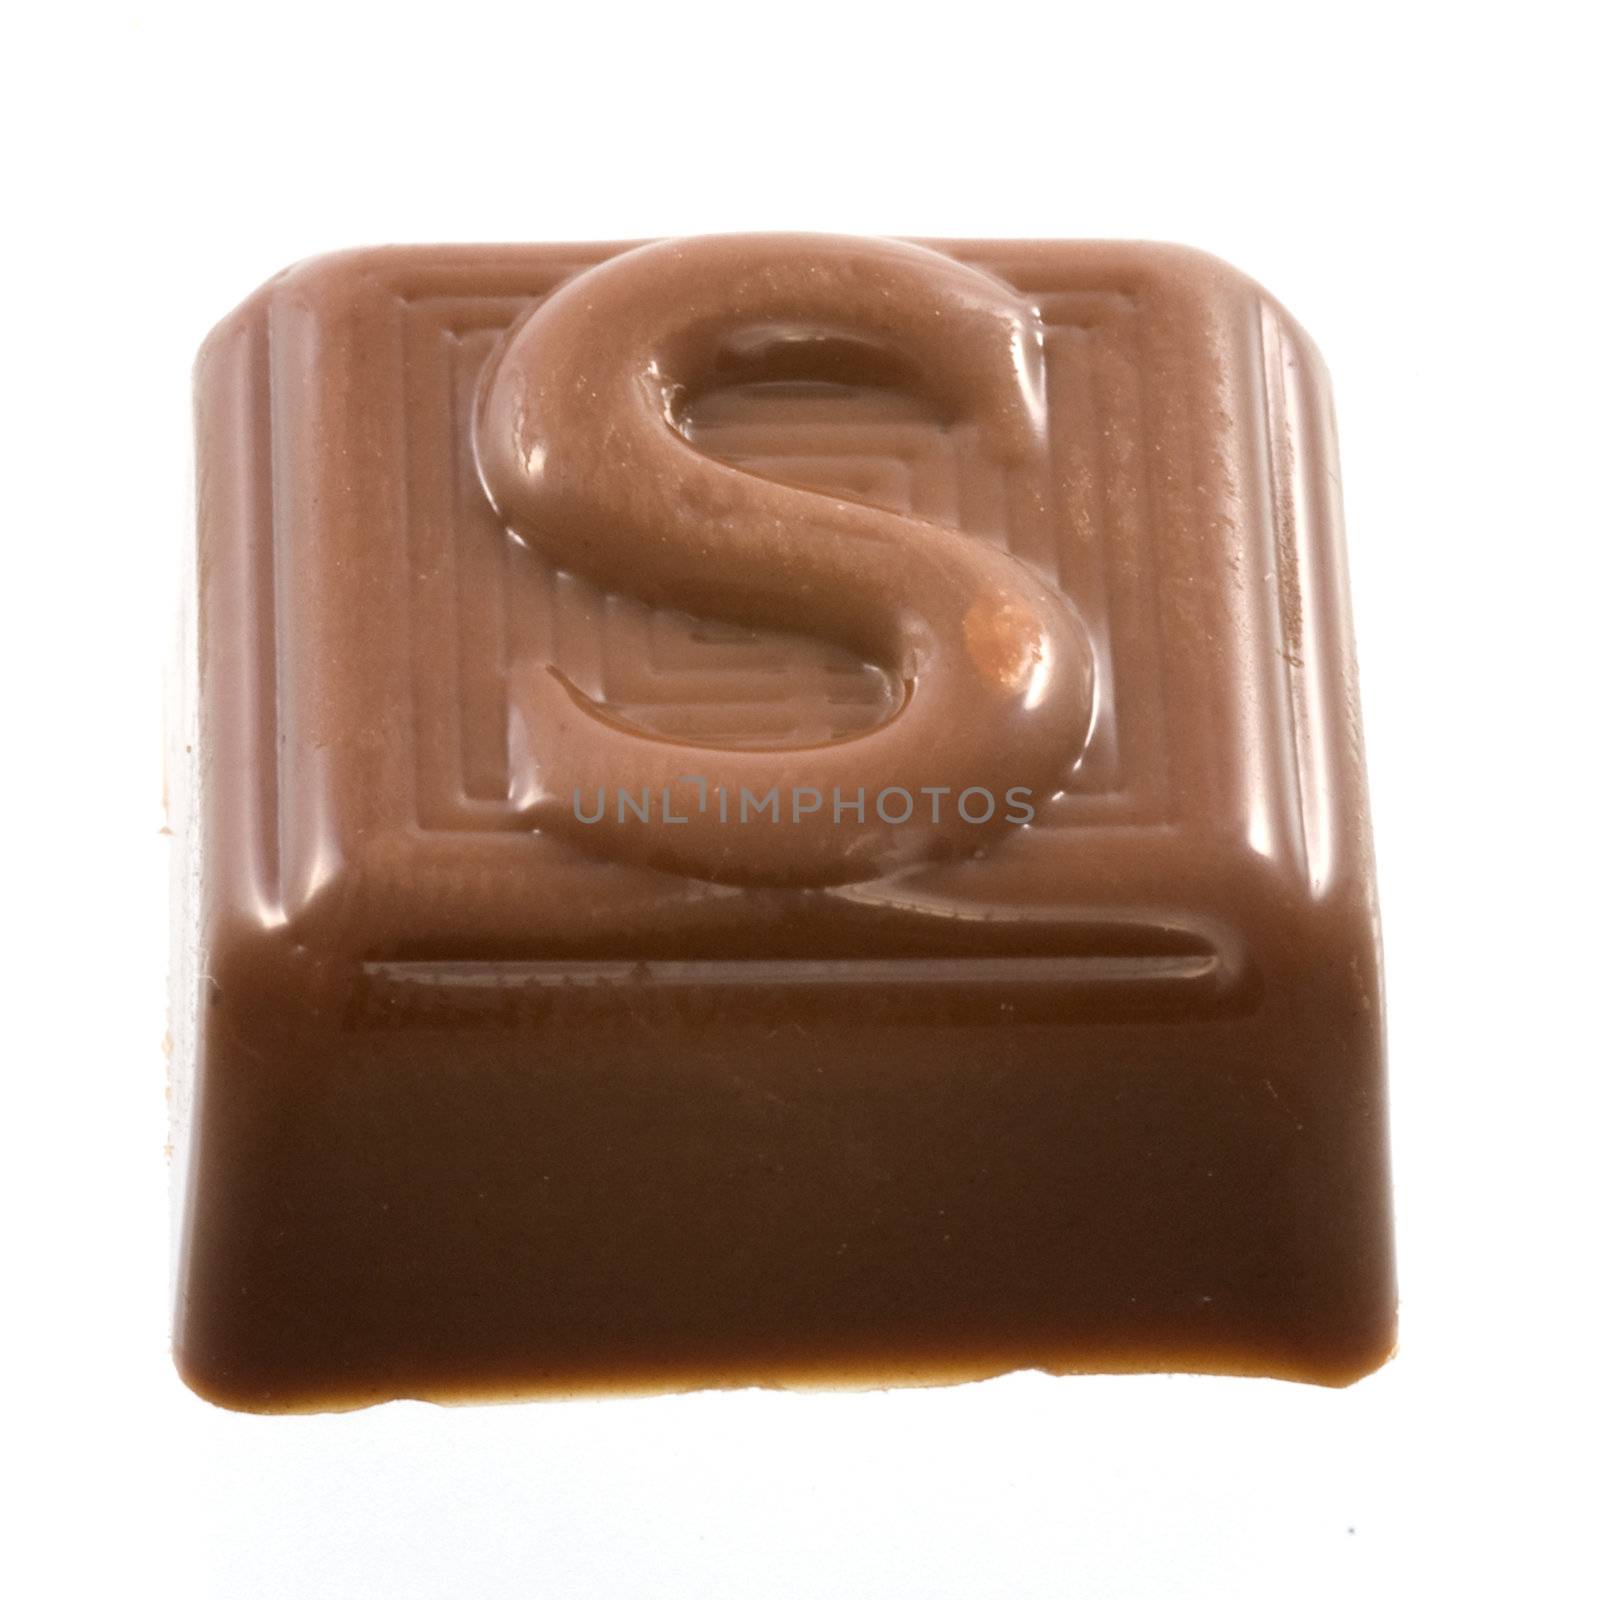 The chocolate letter "S"